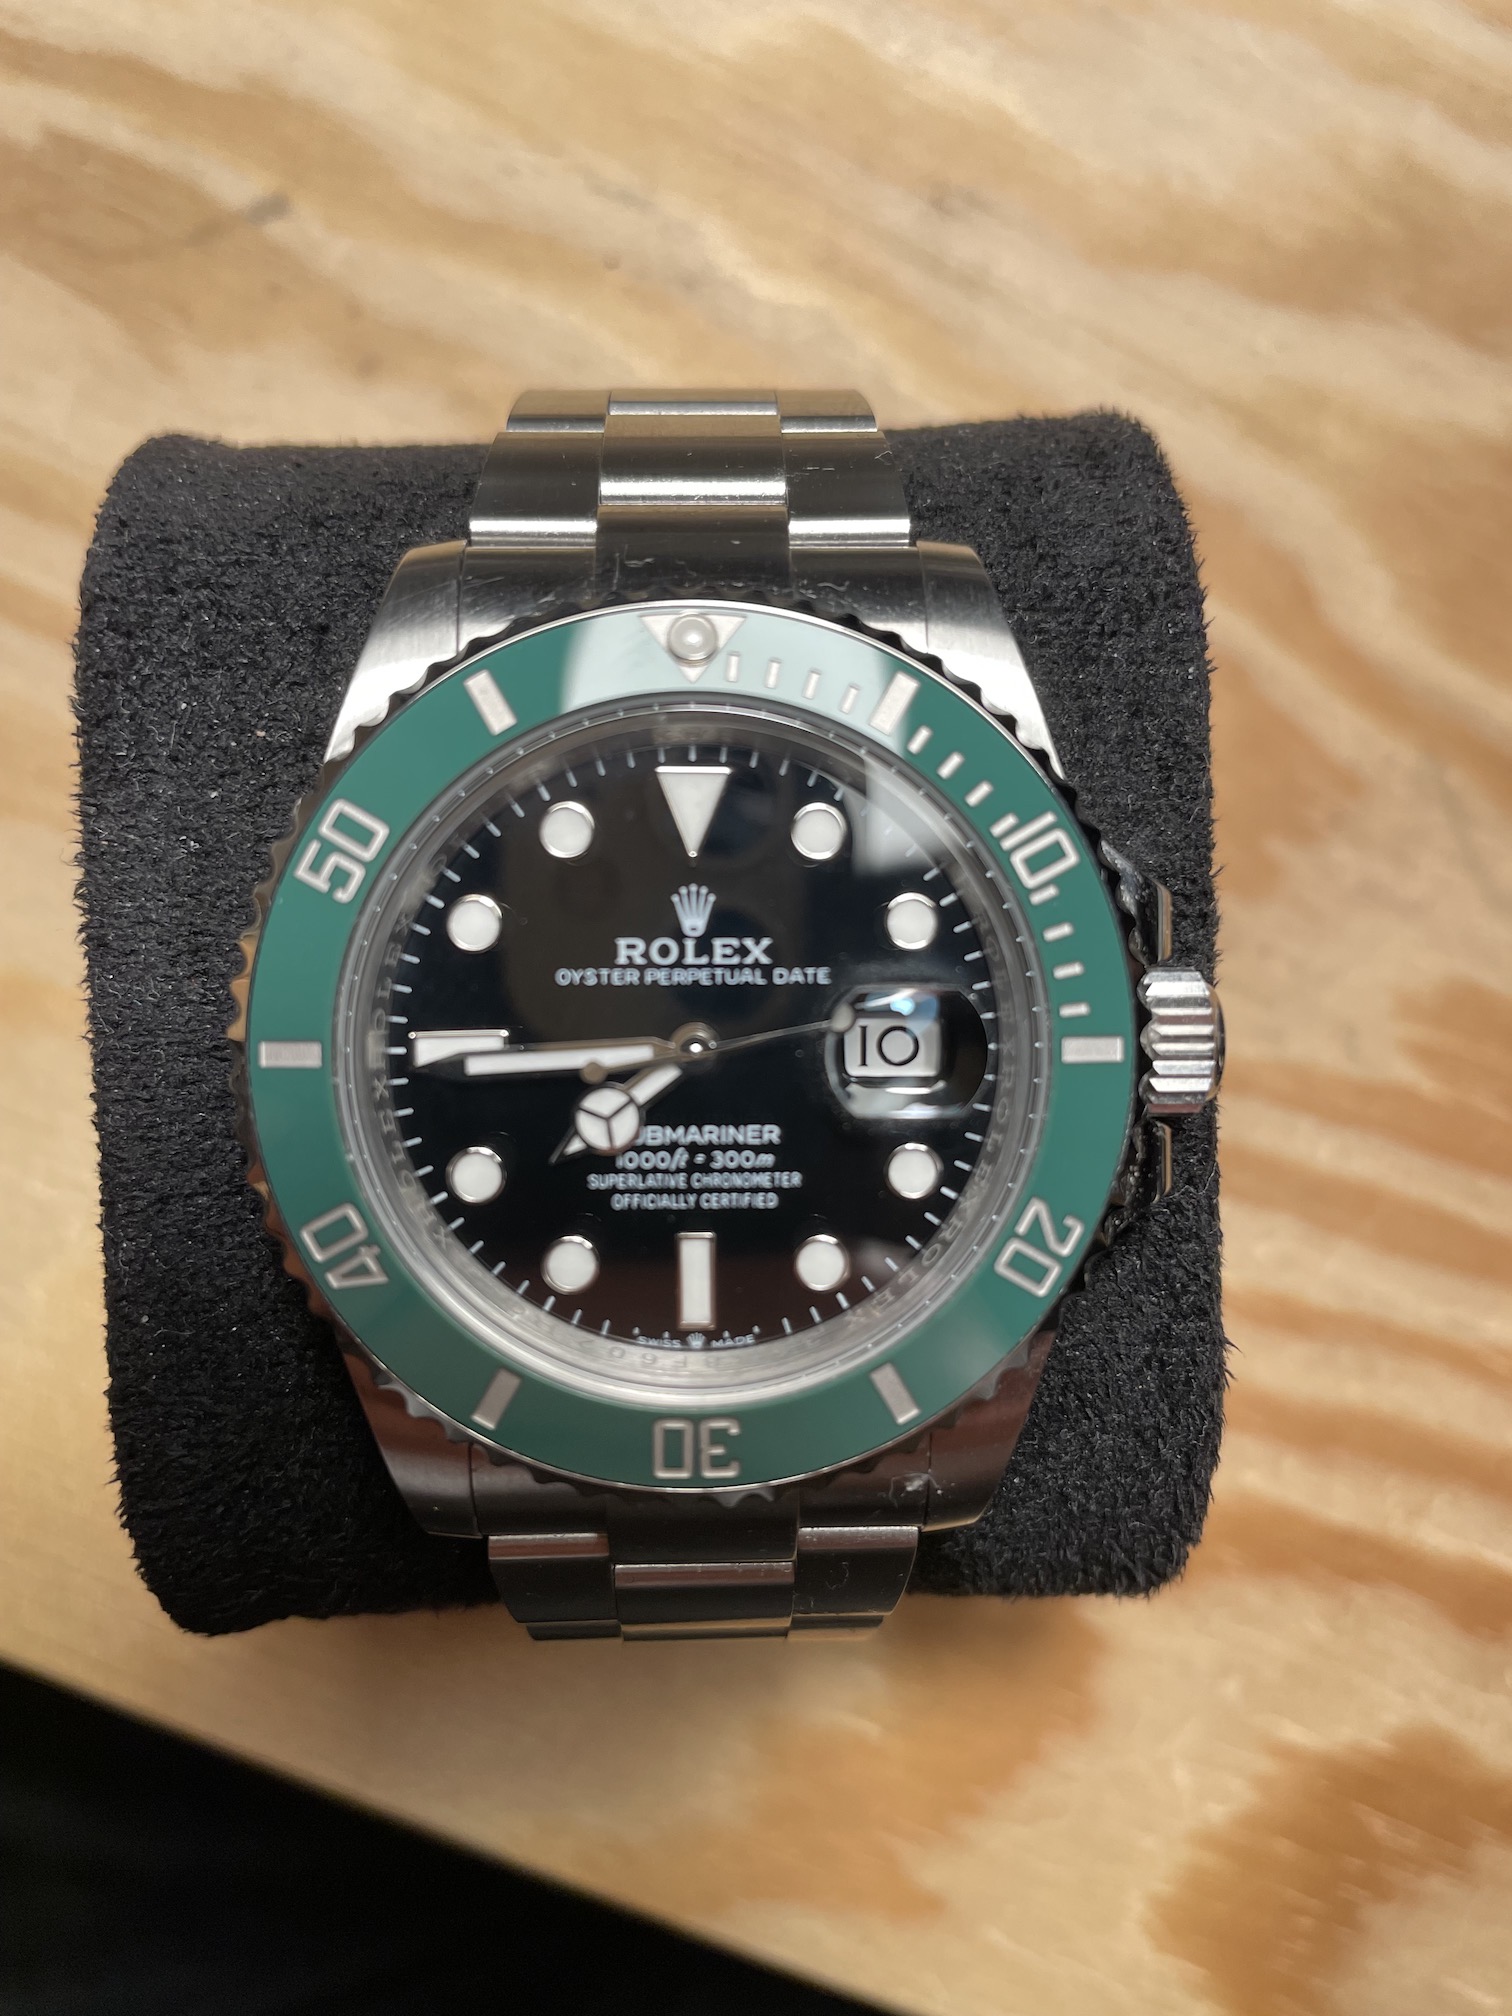 VSF 126610 LN arrived today. - The Rolex Area - RWG